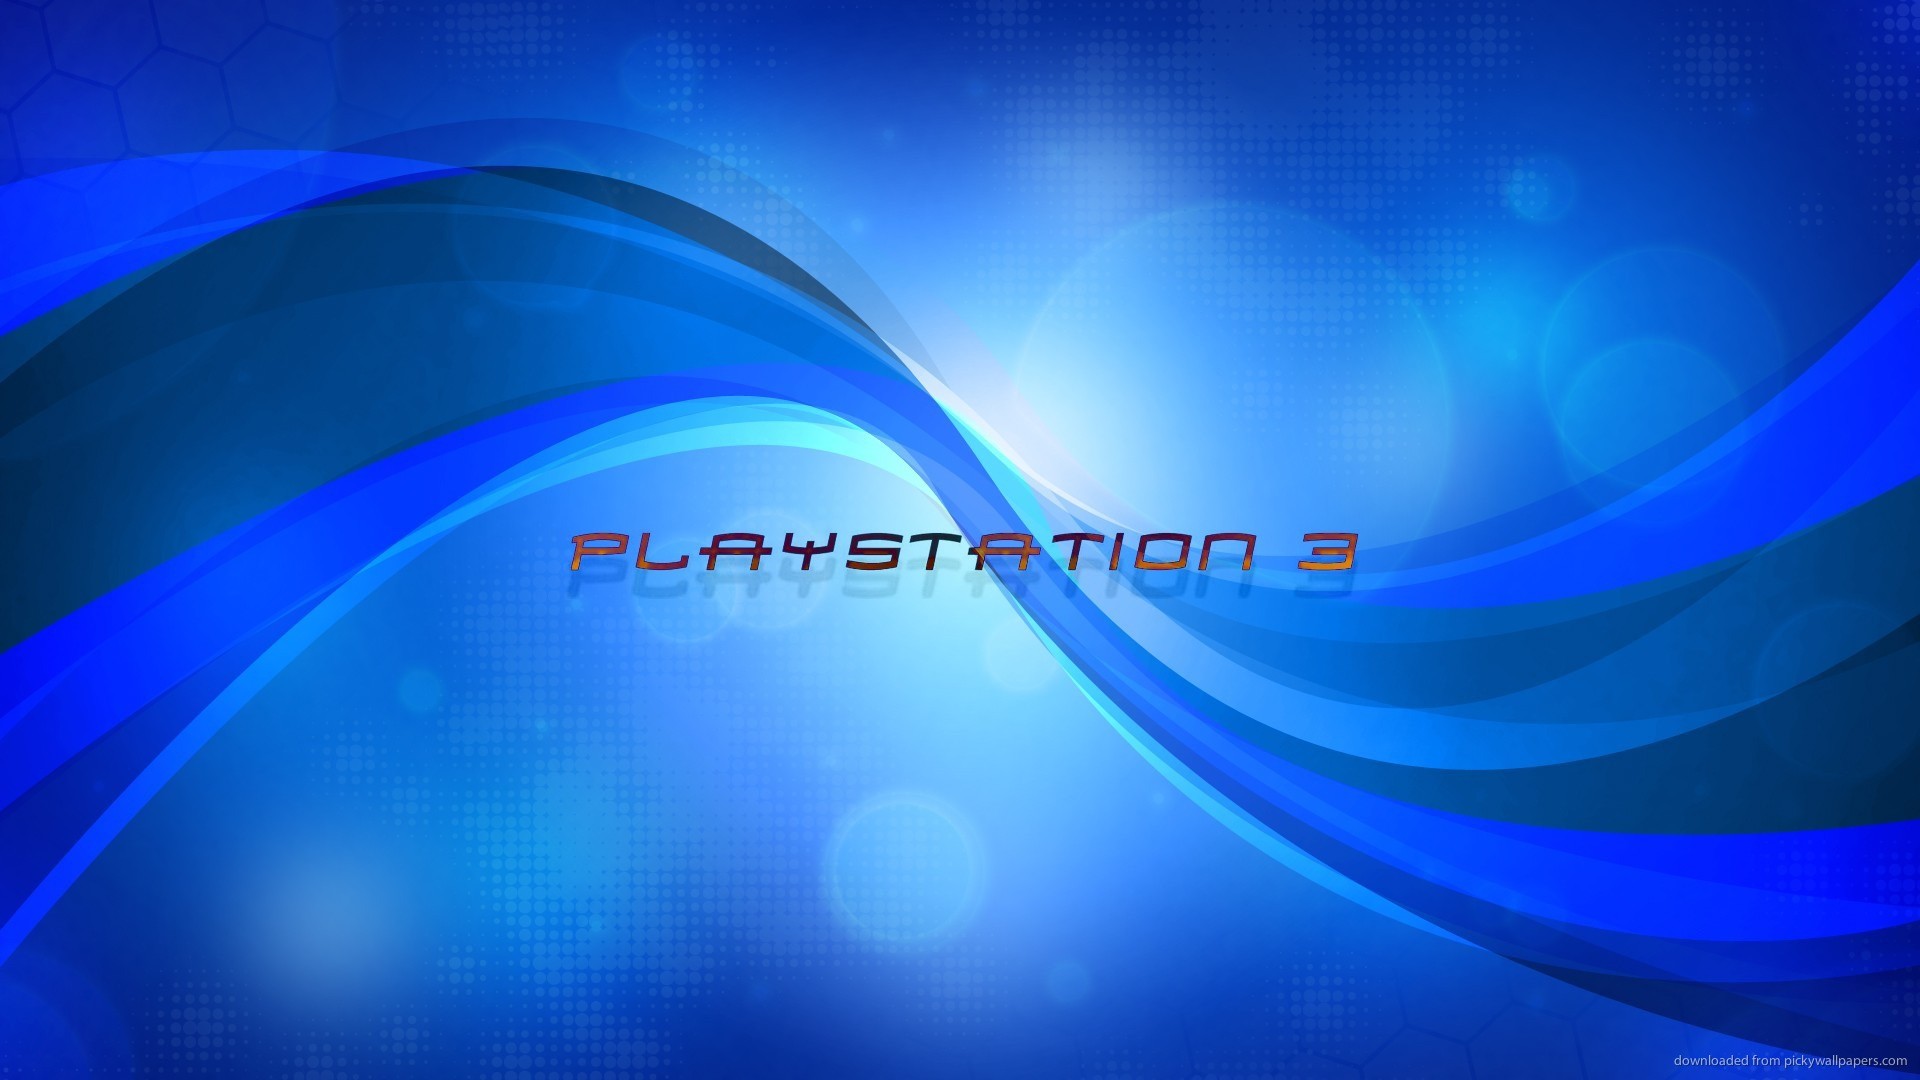 1920x1080 Playstation 3 blue logo picture